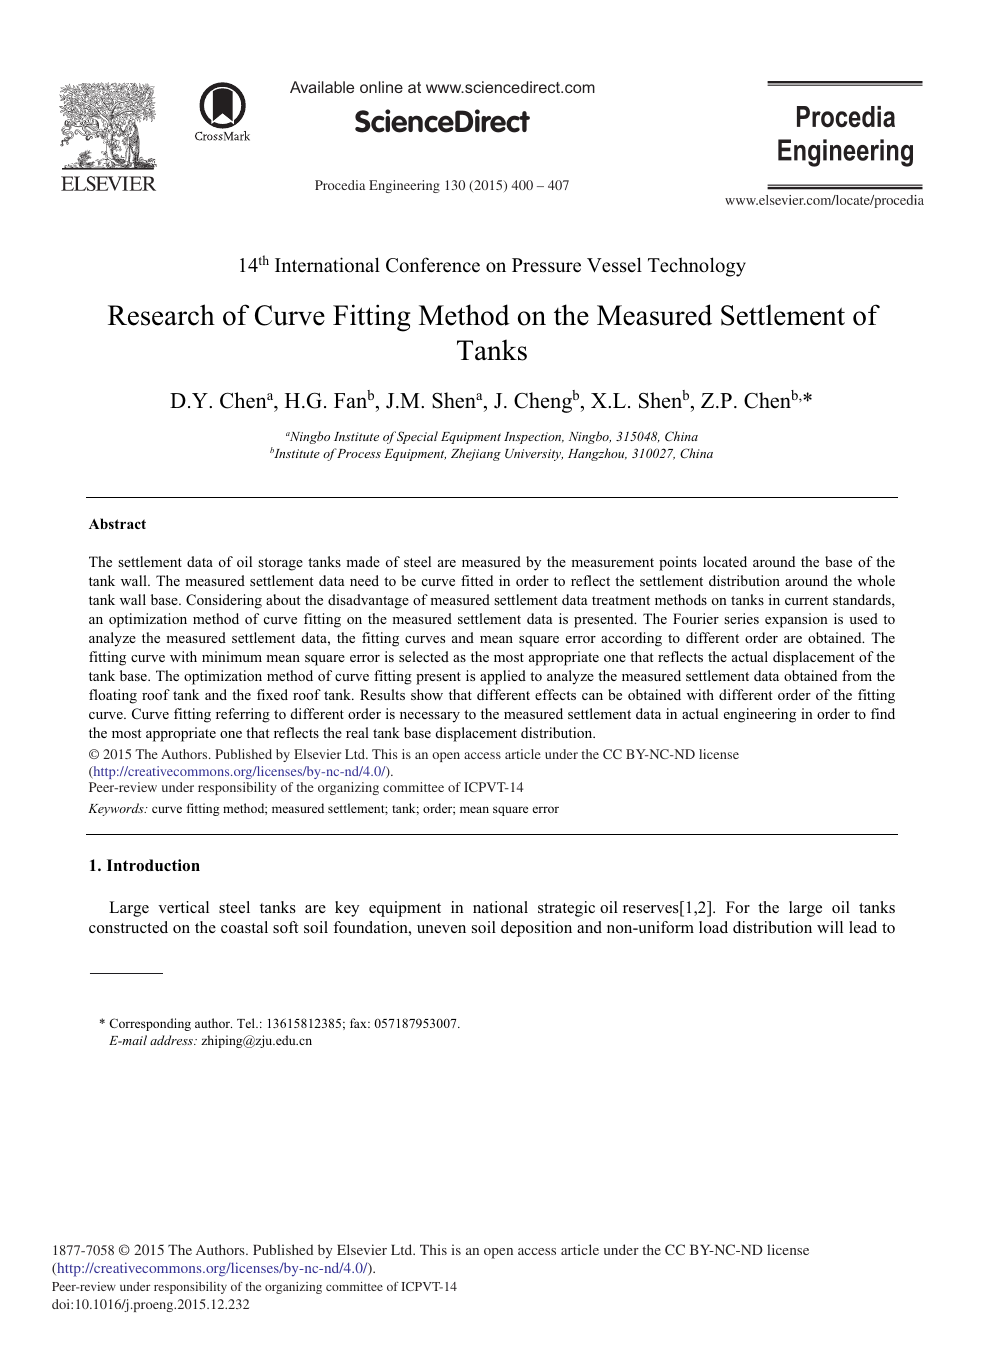 Research Of Curve Fitting Method On The Measured Settlement Of Tanks Topic Of Research Paper In Civil Engineering Download Scholarly Article Pdf And Read For Free On Cyberleninka Open Science Hub